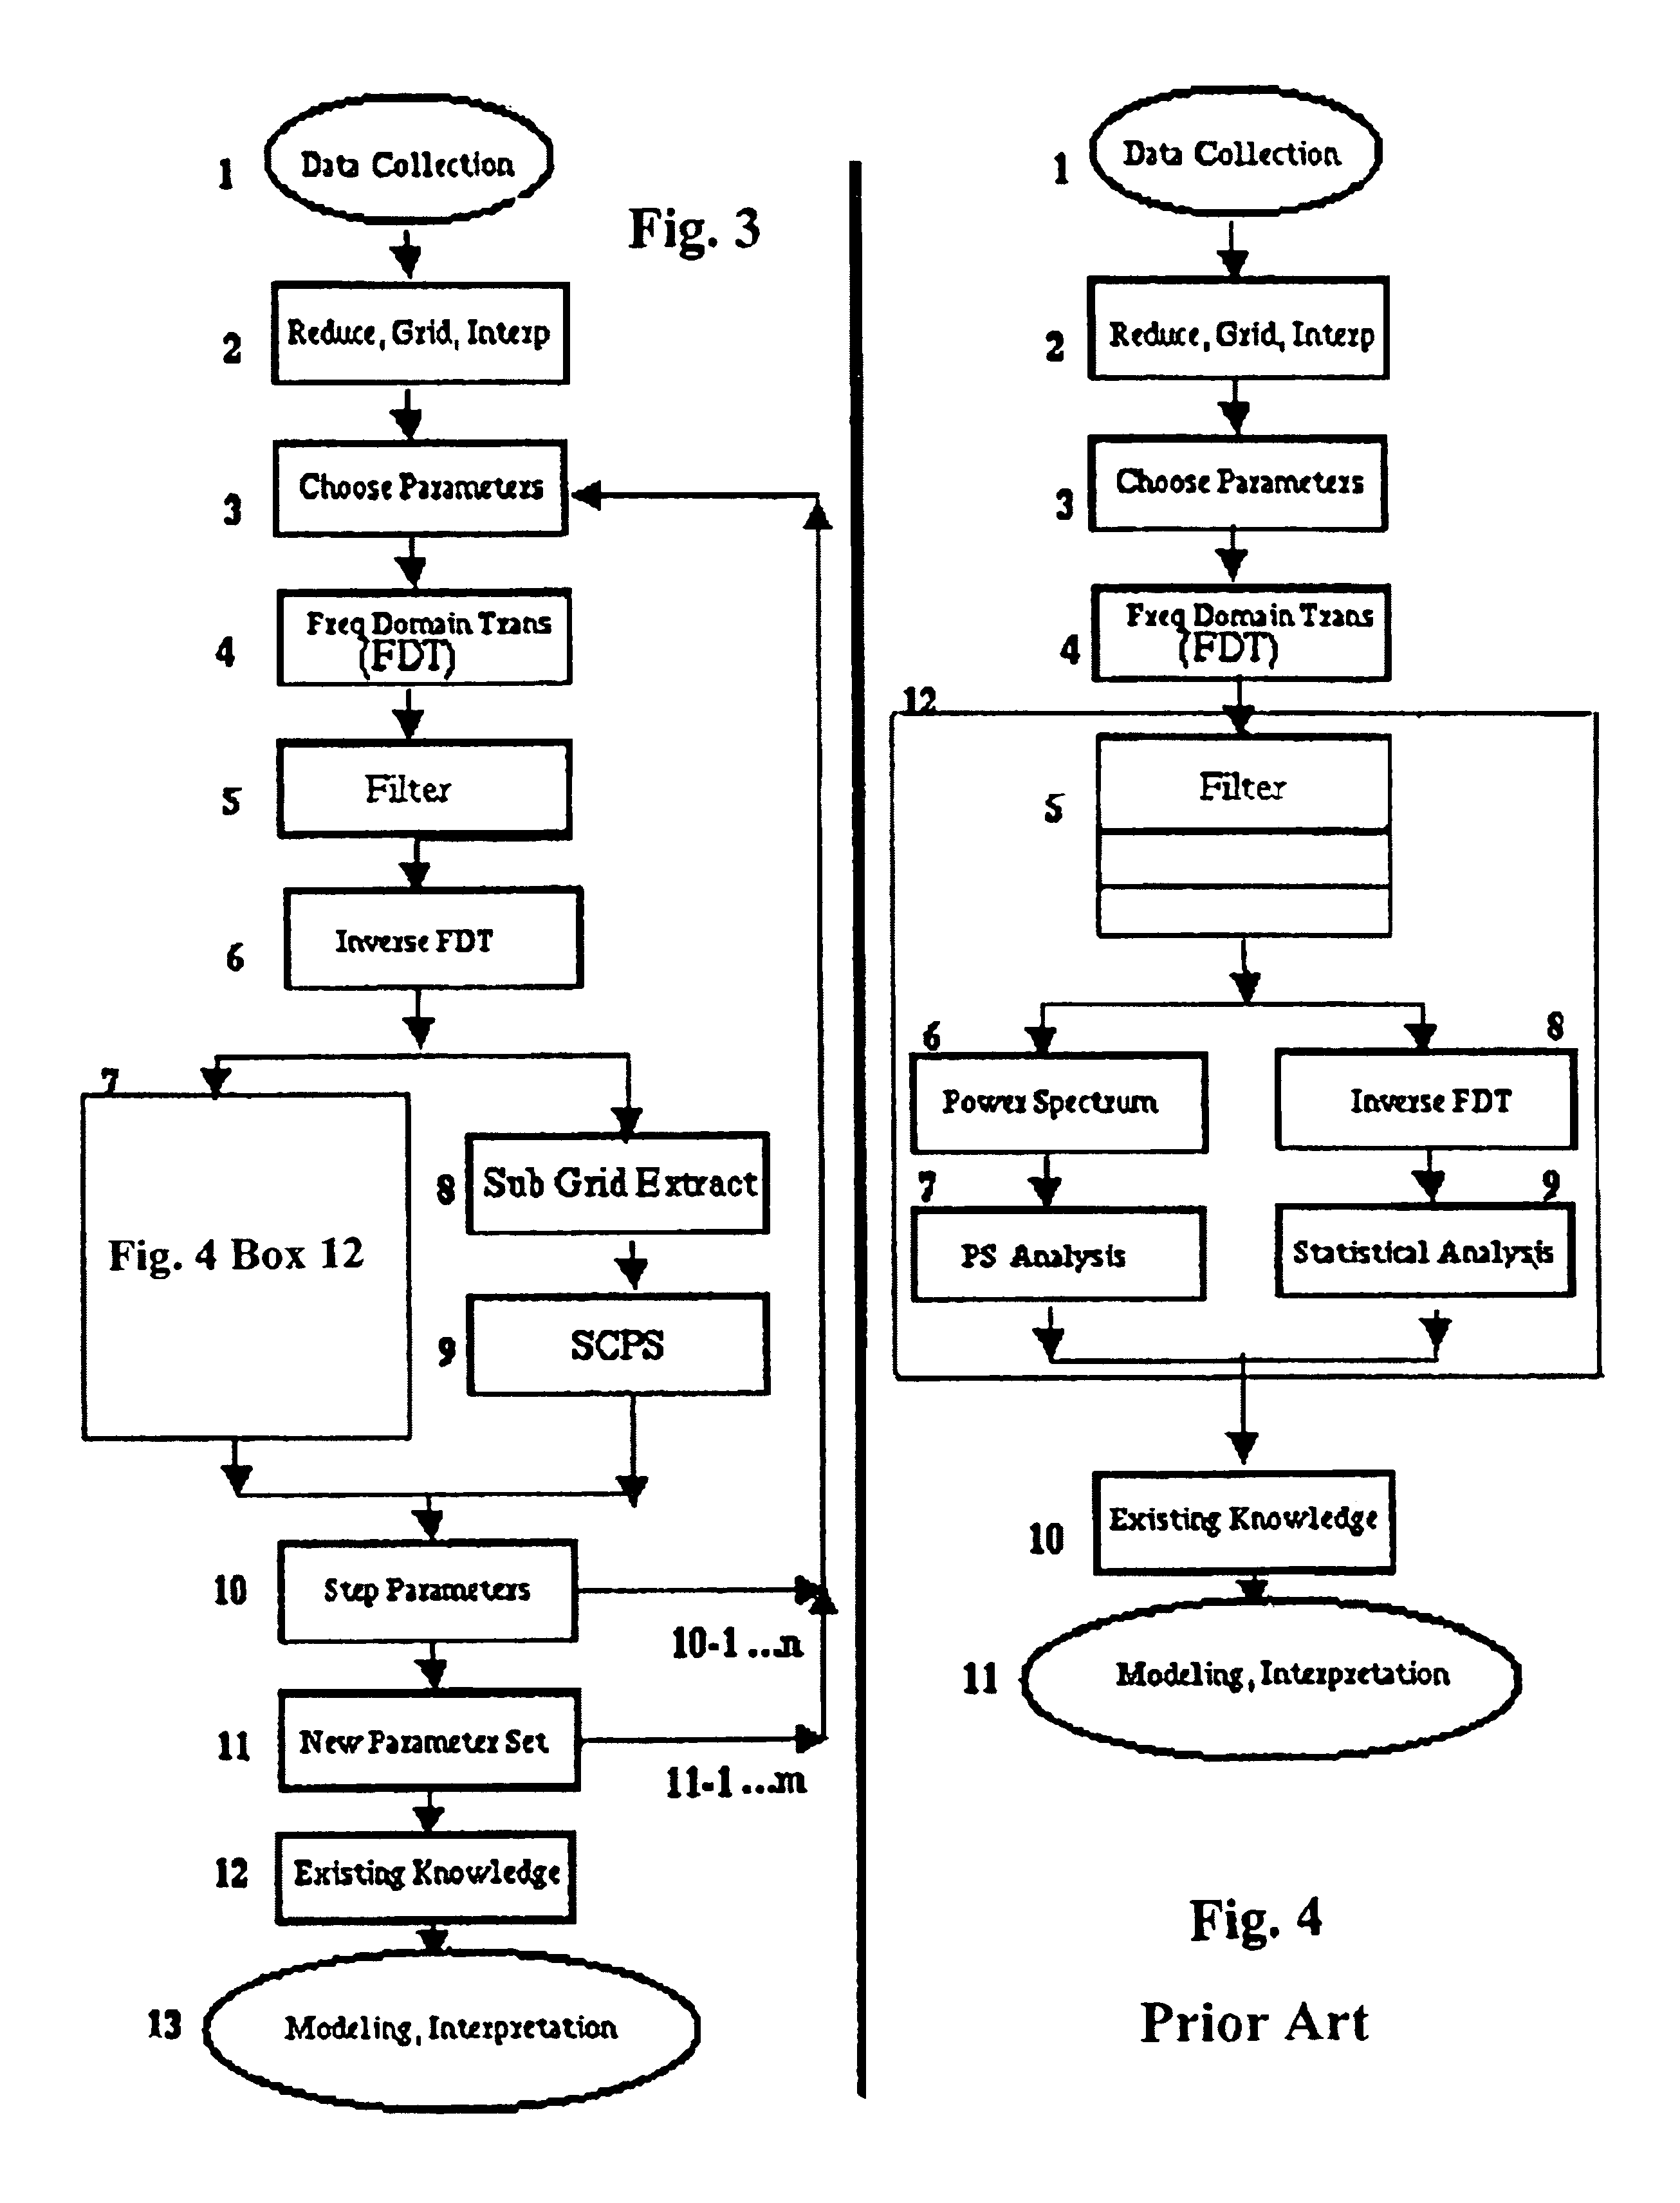 Method for enhancing depth and spatial resolution of one and two dimensional residual surfaces derived from scalar potential data